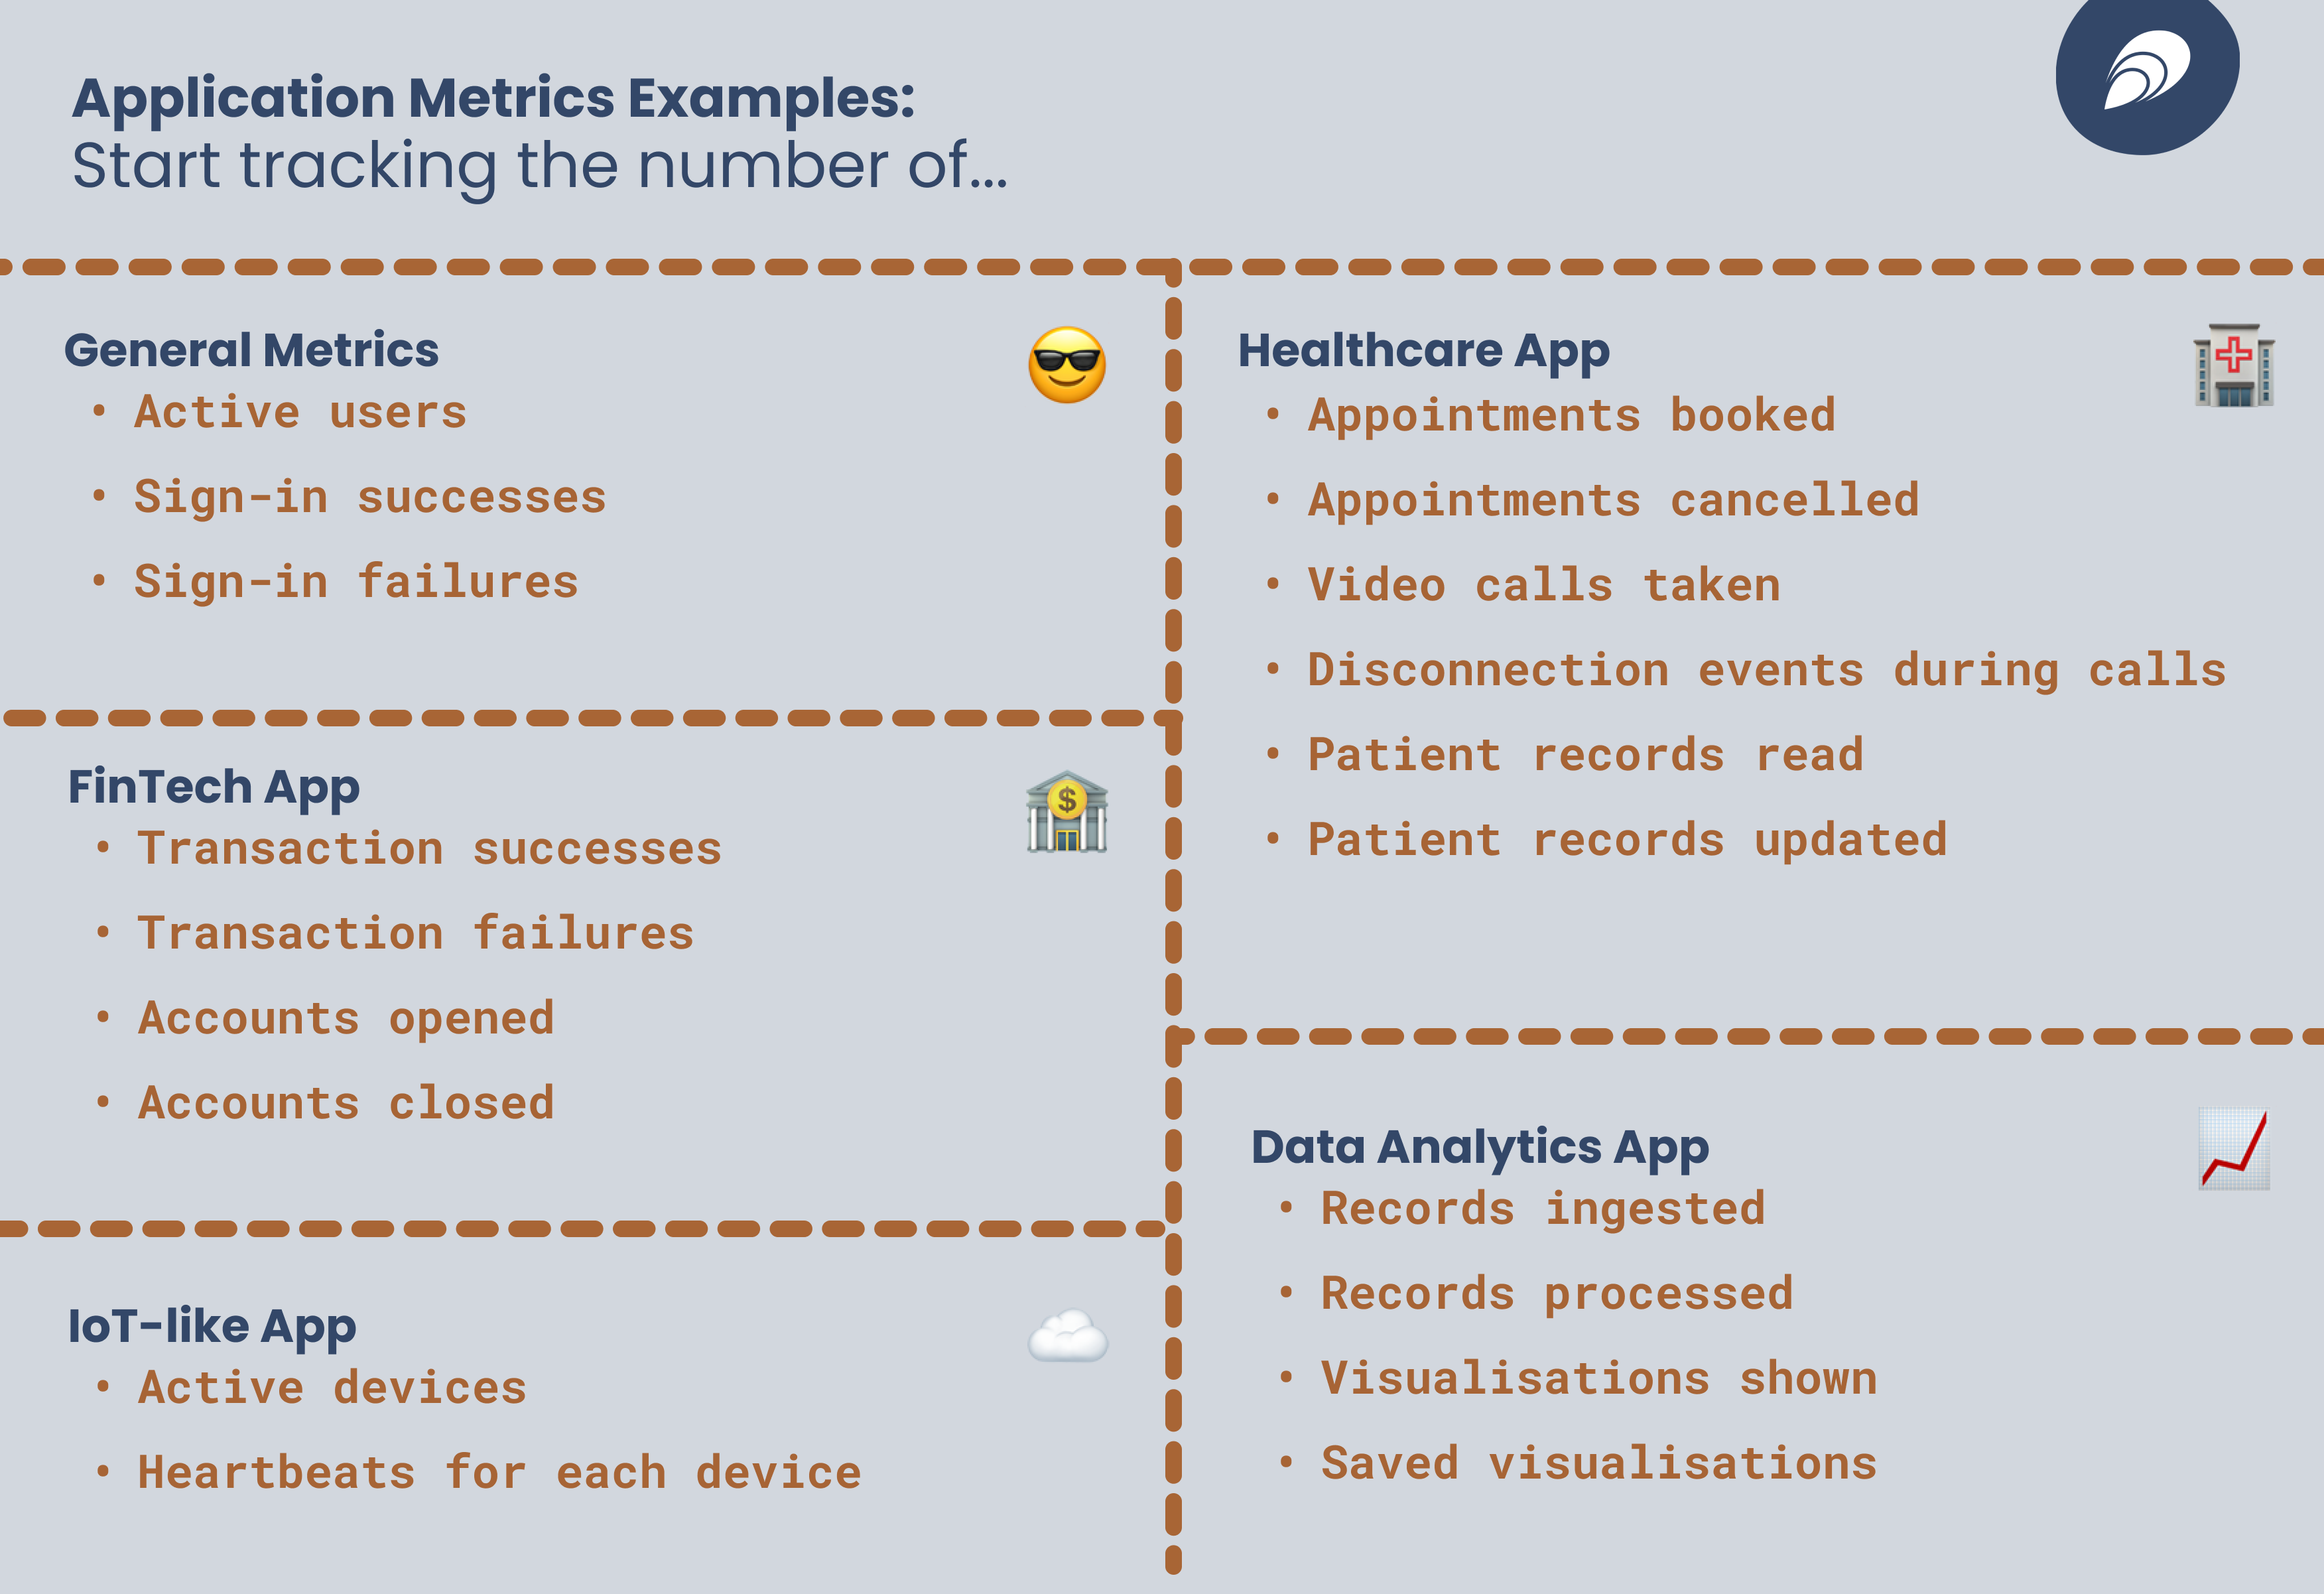 Example application metrics as per the list above